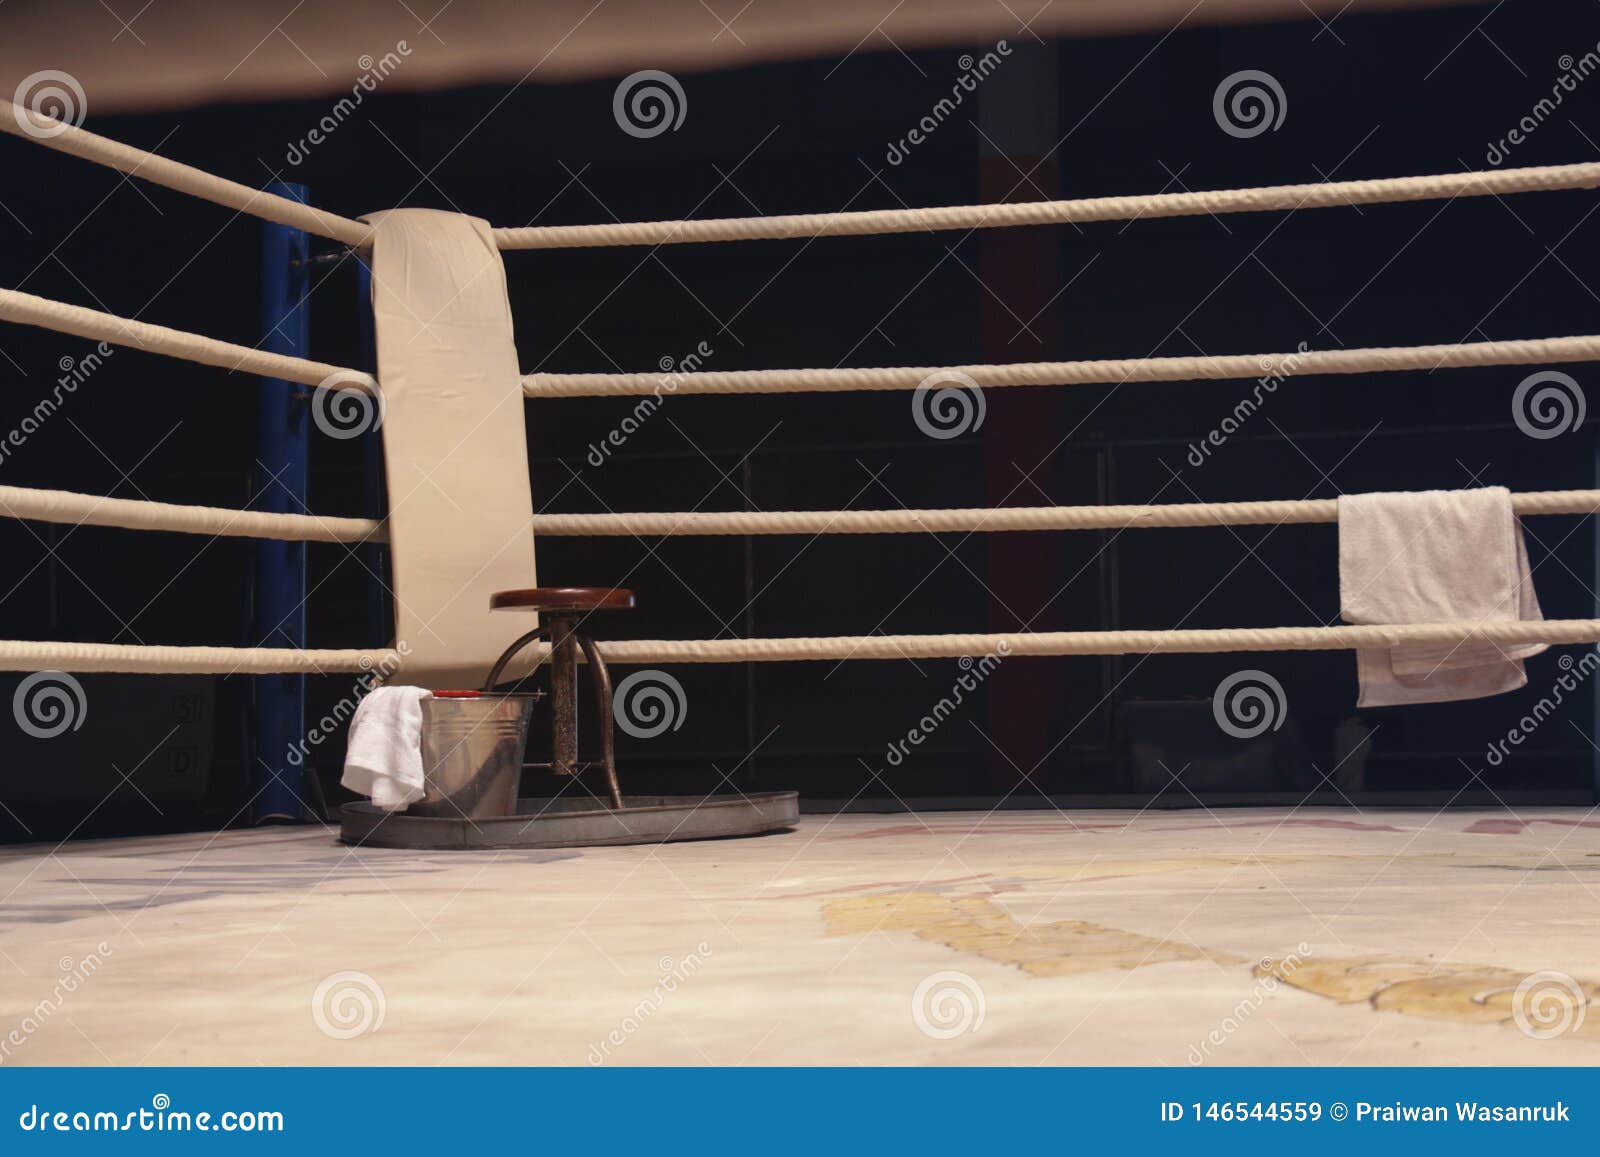 Need boxing ring with overlays - Art Resources - Episode Forums